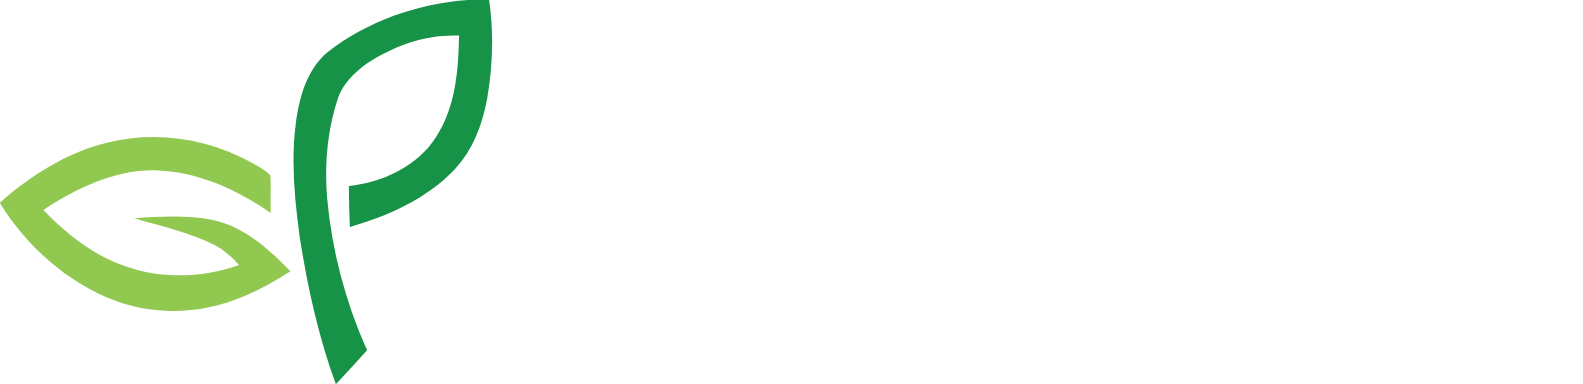 GreenPower Motor Company logo large for dark backgrounds (transparent PNG)